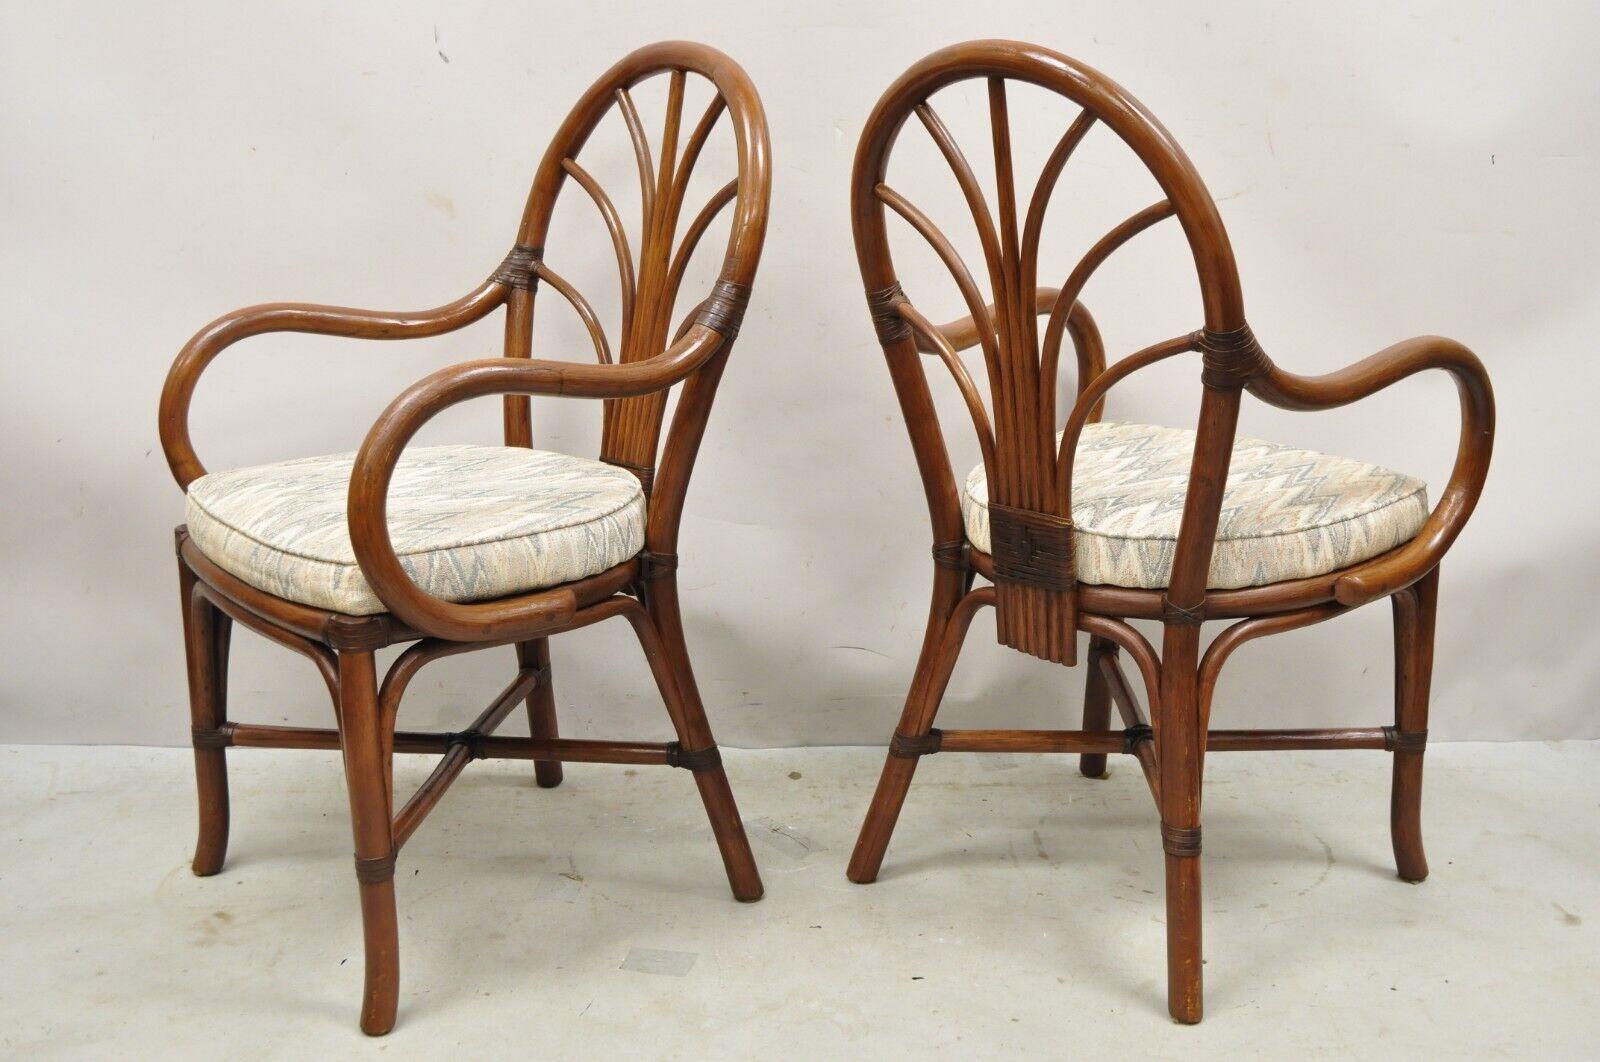 Vintage Bentwood Rattan Hollywood Regency Fan Back Dining Chairs - Set von 4. CIRCA Late 20th Century. Abmessungen: 36